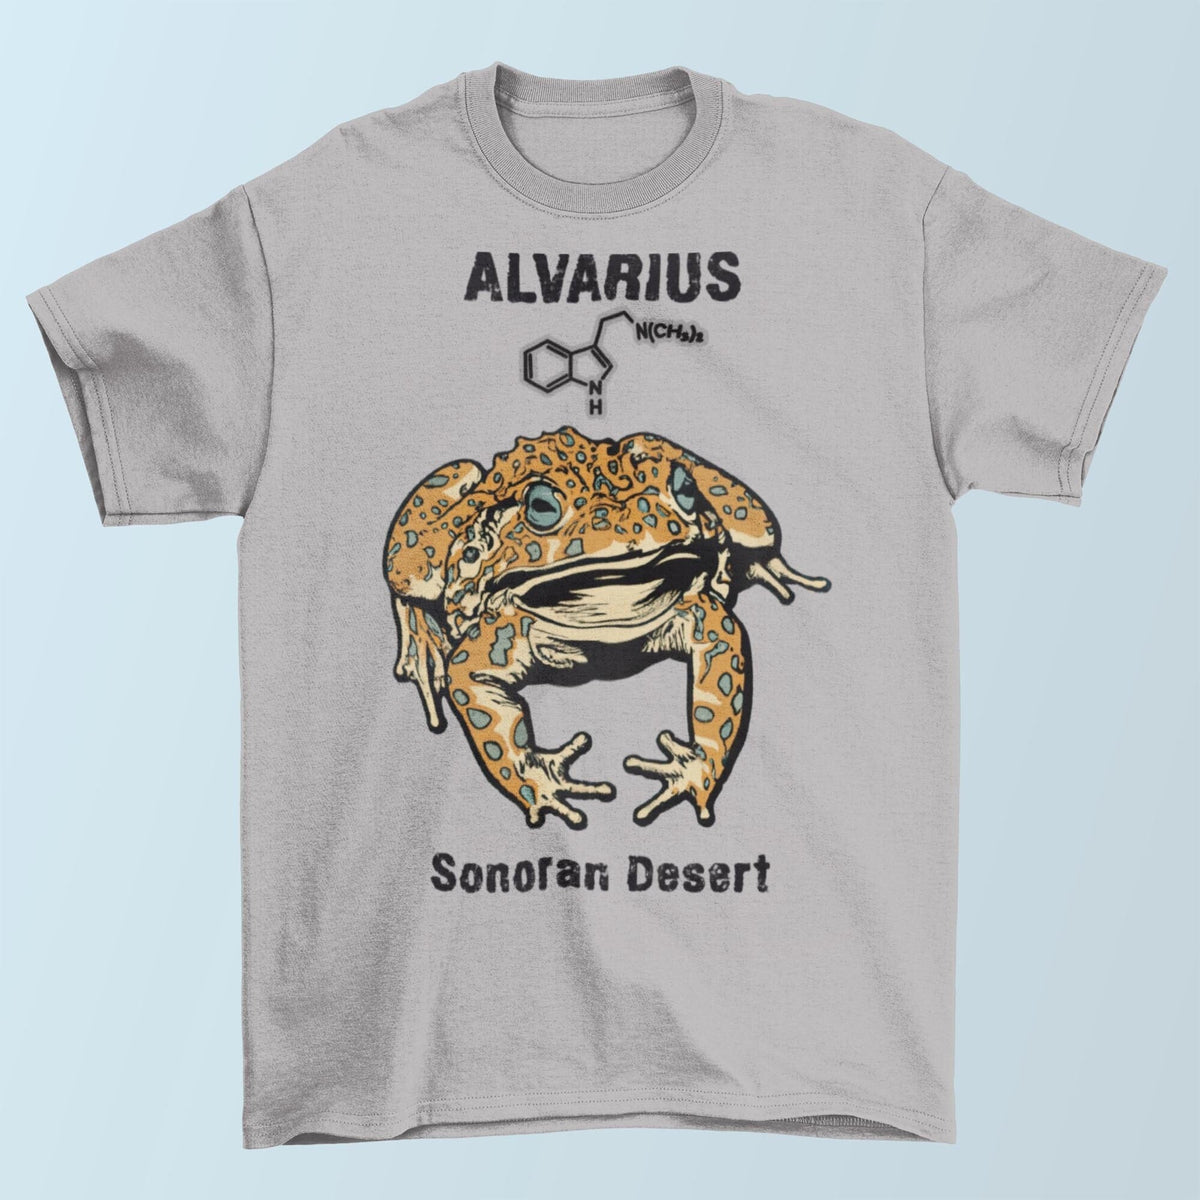 S / Gravel Bufo Alvarius Toad, The Sonoran Desert 5-MeO DMT Psychedelic Frog, Trippy Ayahuasca Weed Chemistry | 420 Spiritual Digital Art T-Shirt Tee